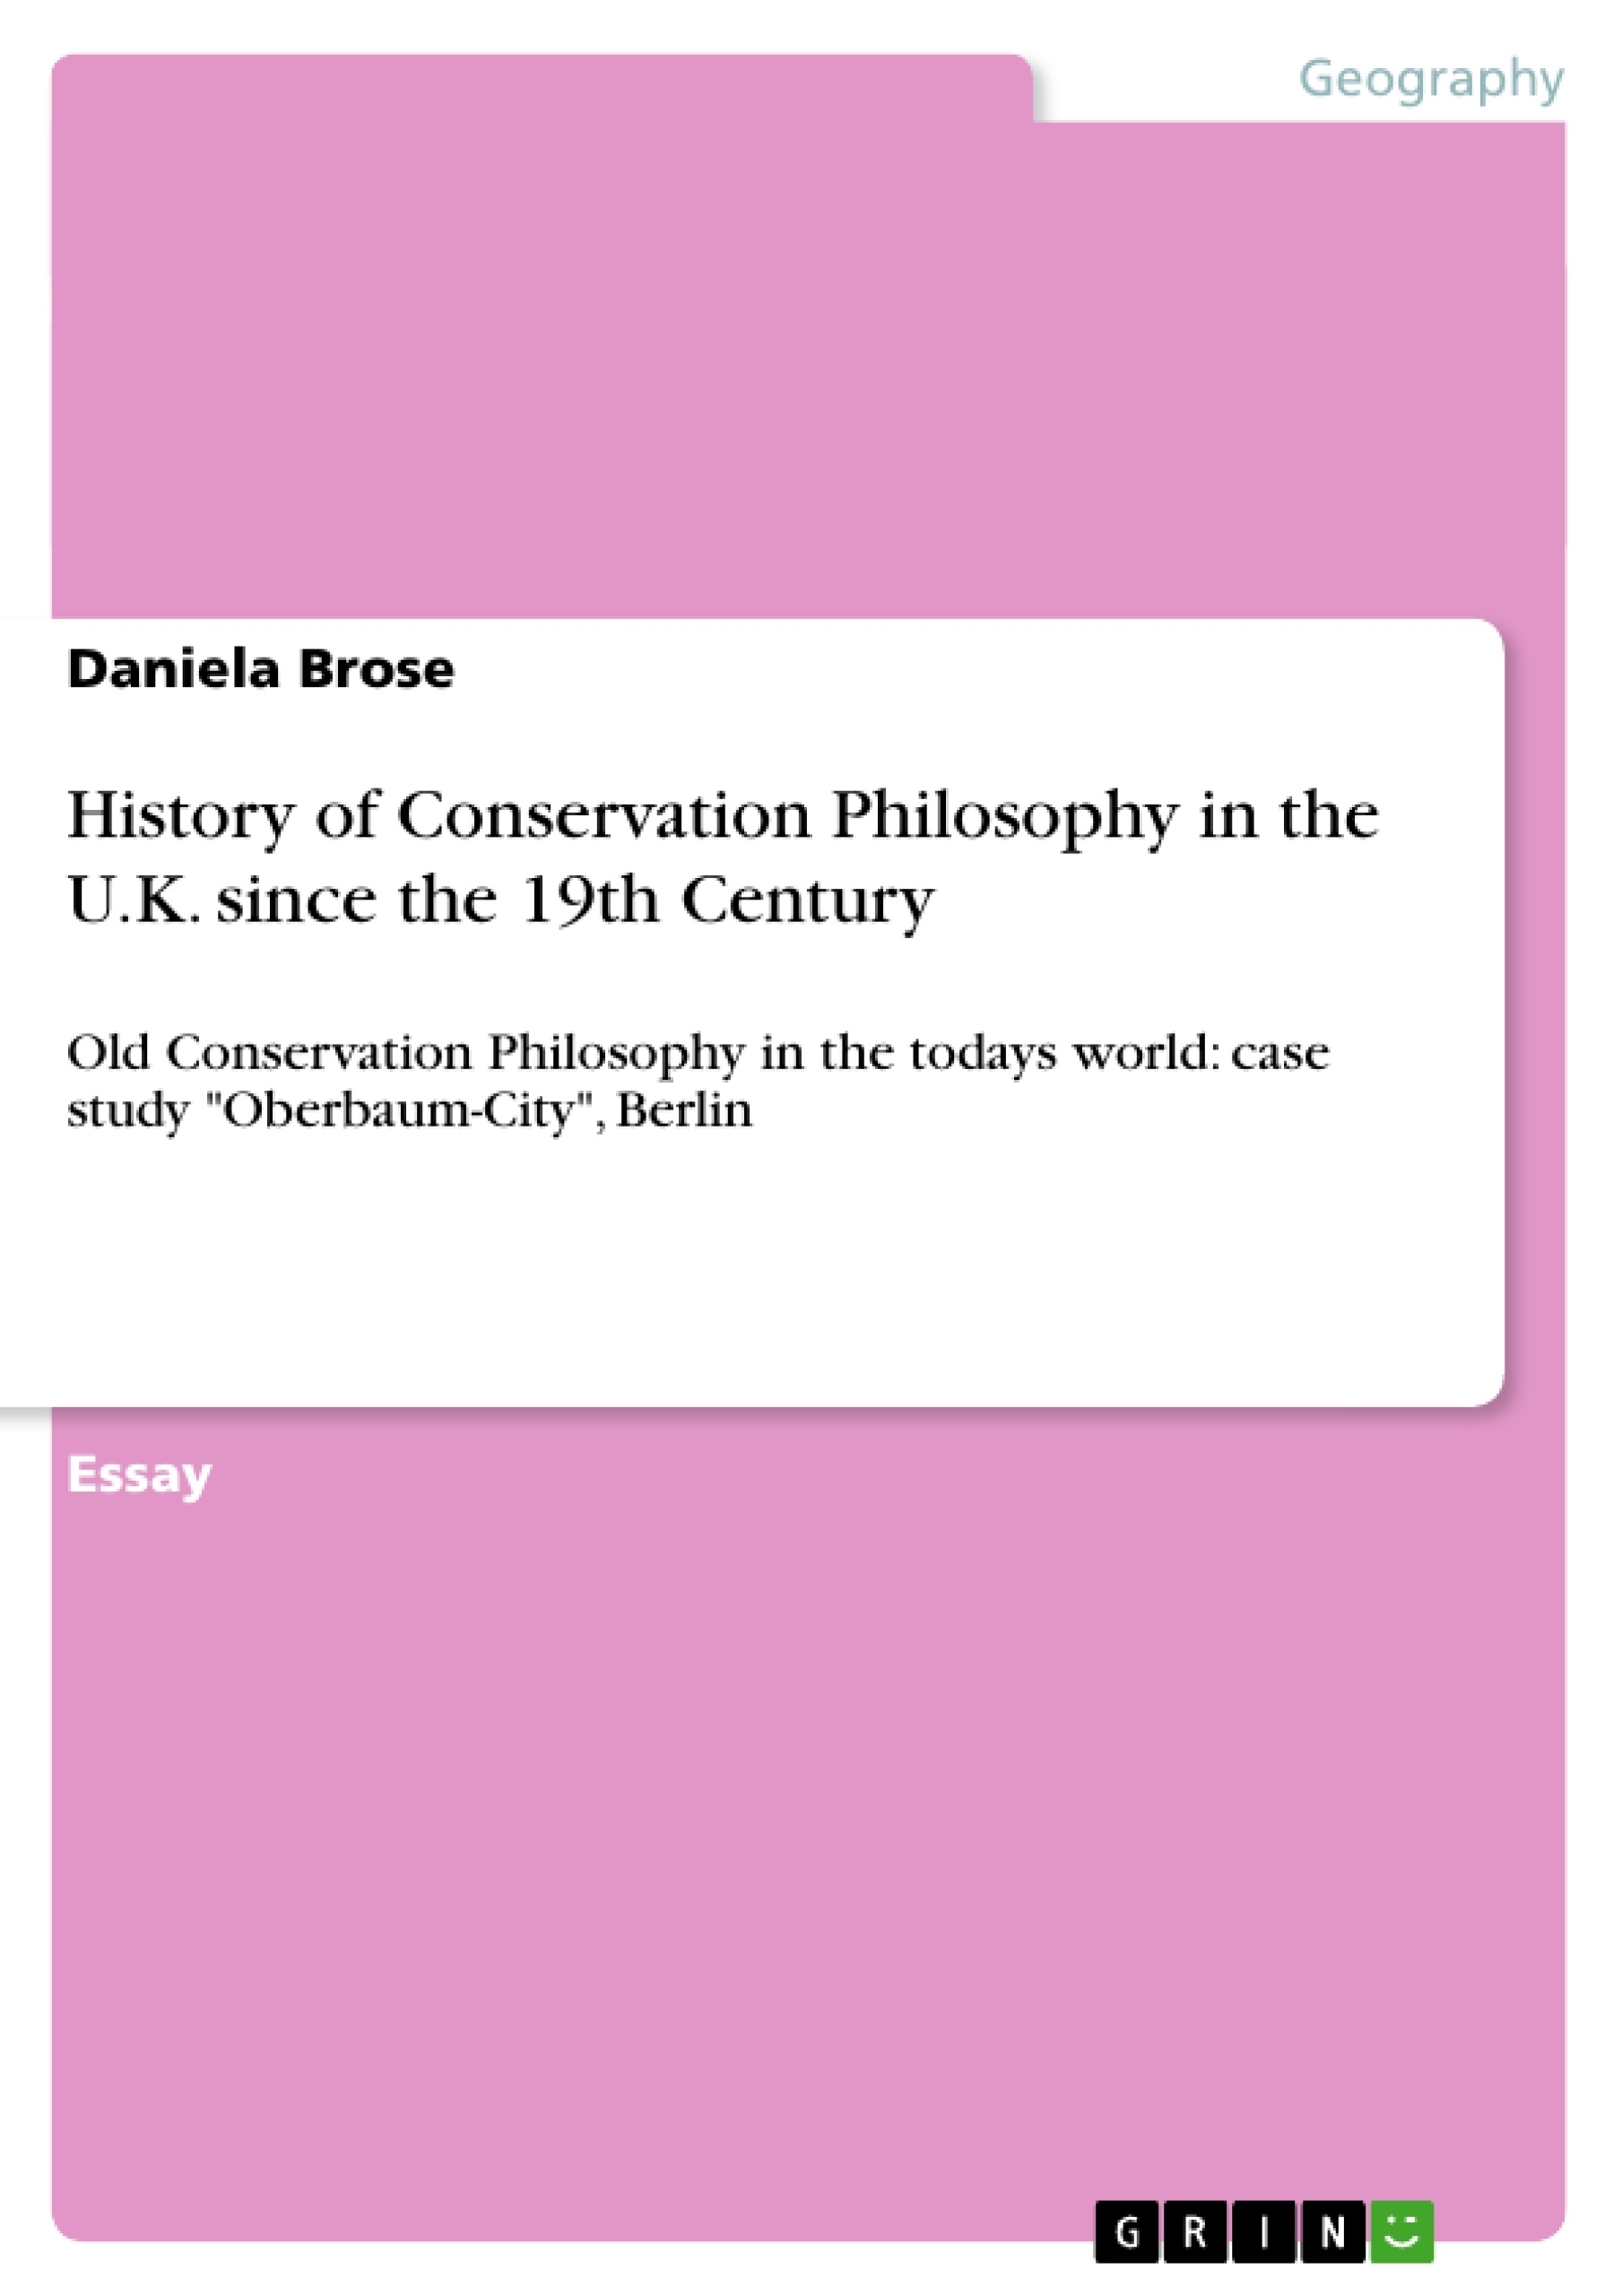 Title: History of Conservation Philosophy in the U.K. since the 19th Century